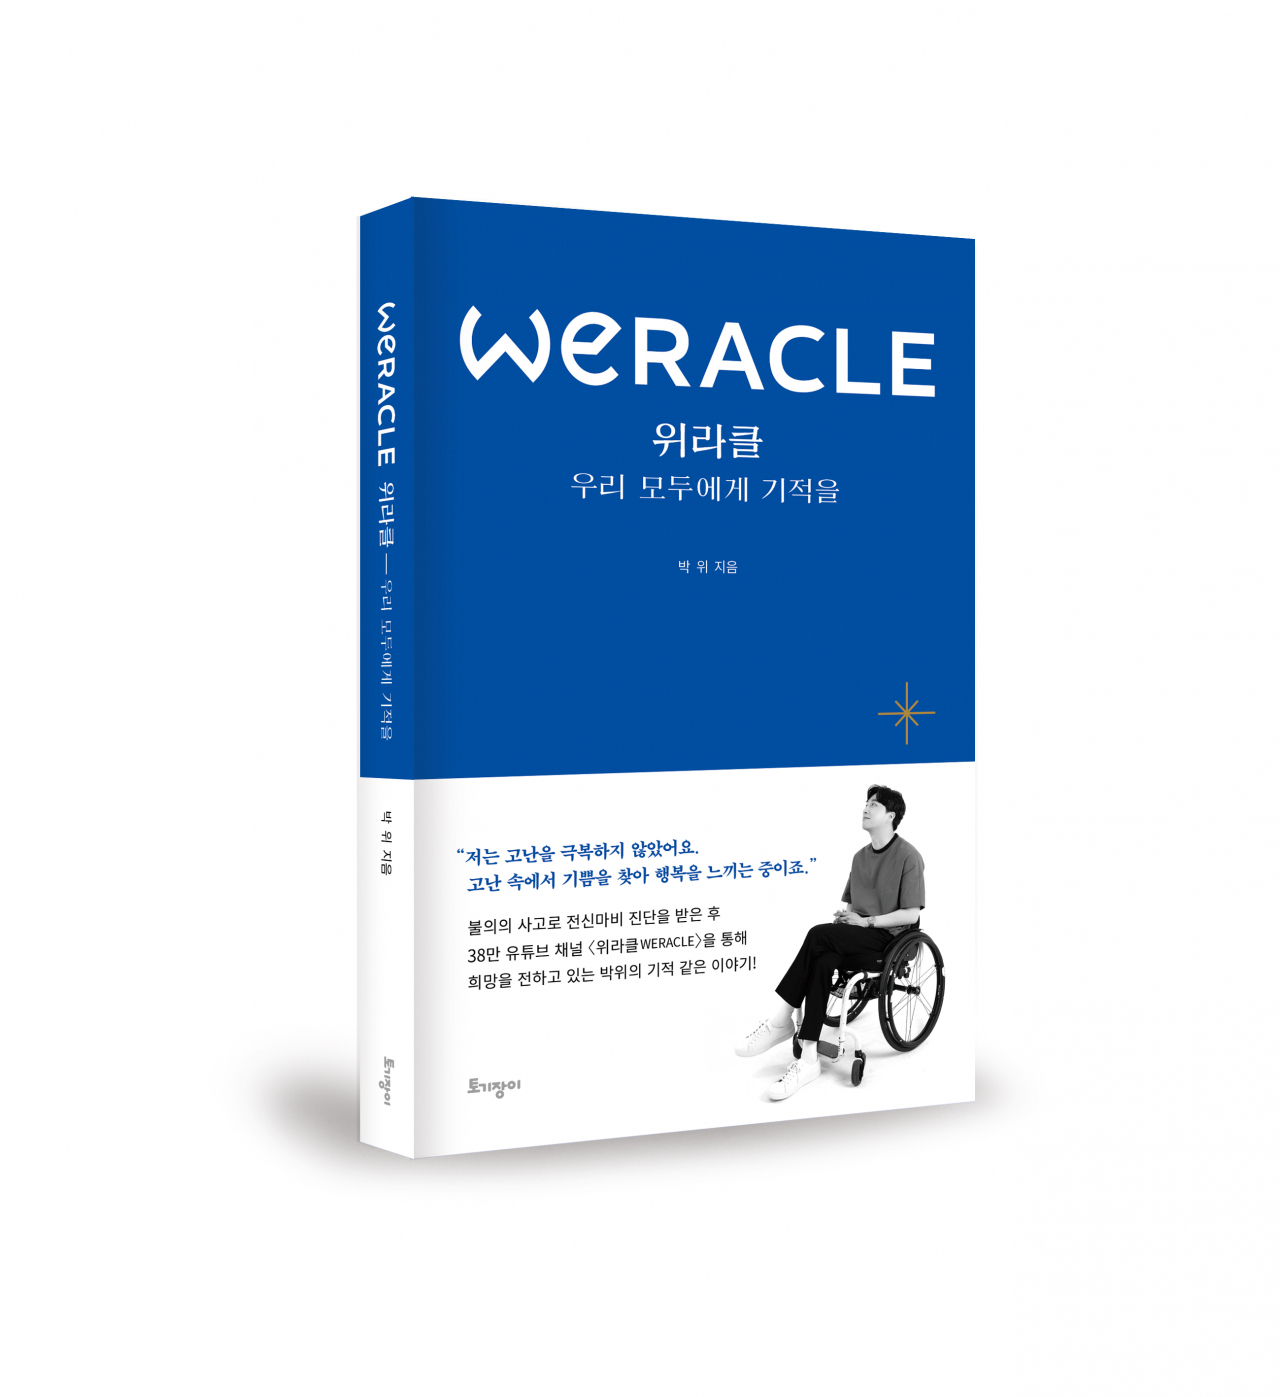 Cover of Park We’s book “Weracle” (Courtesy of Park We)